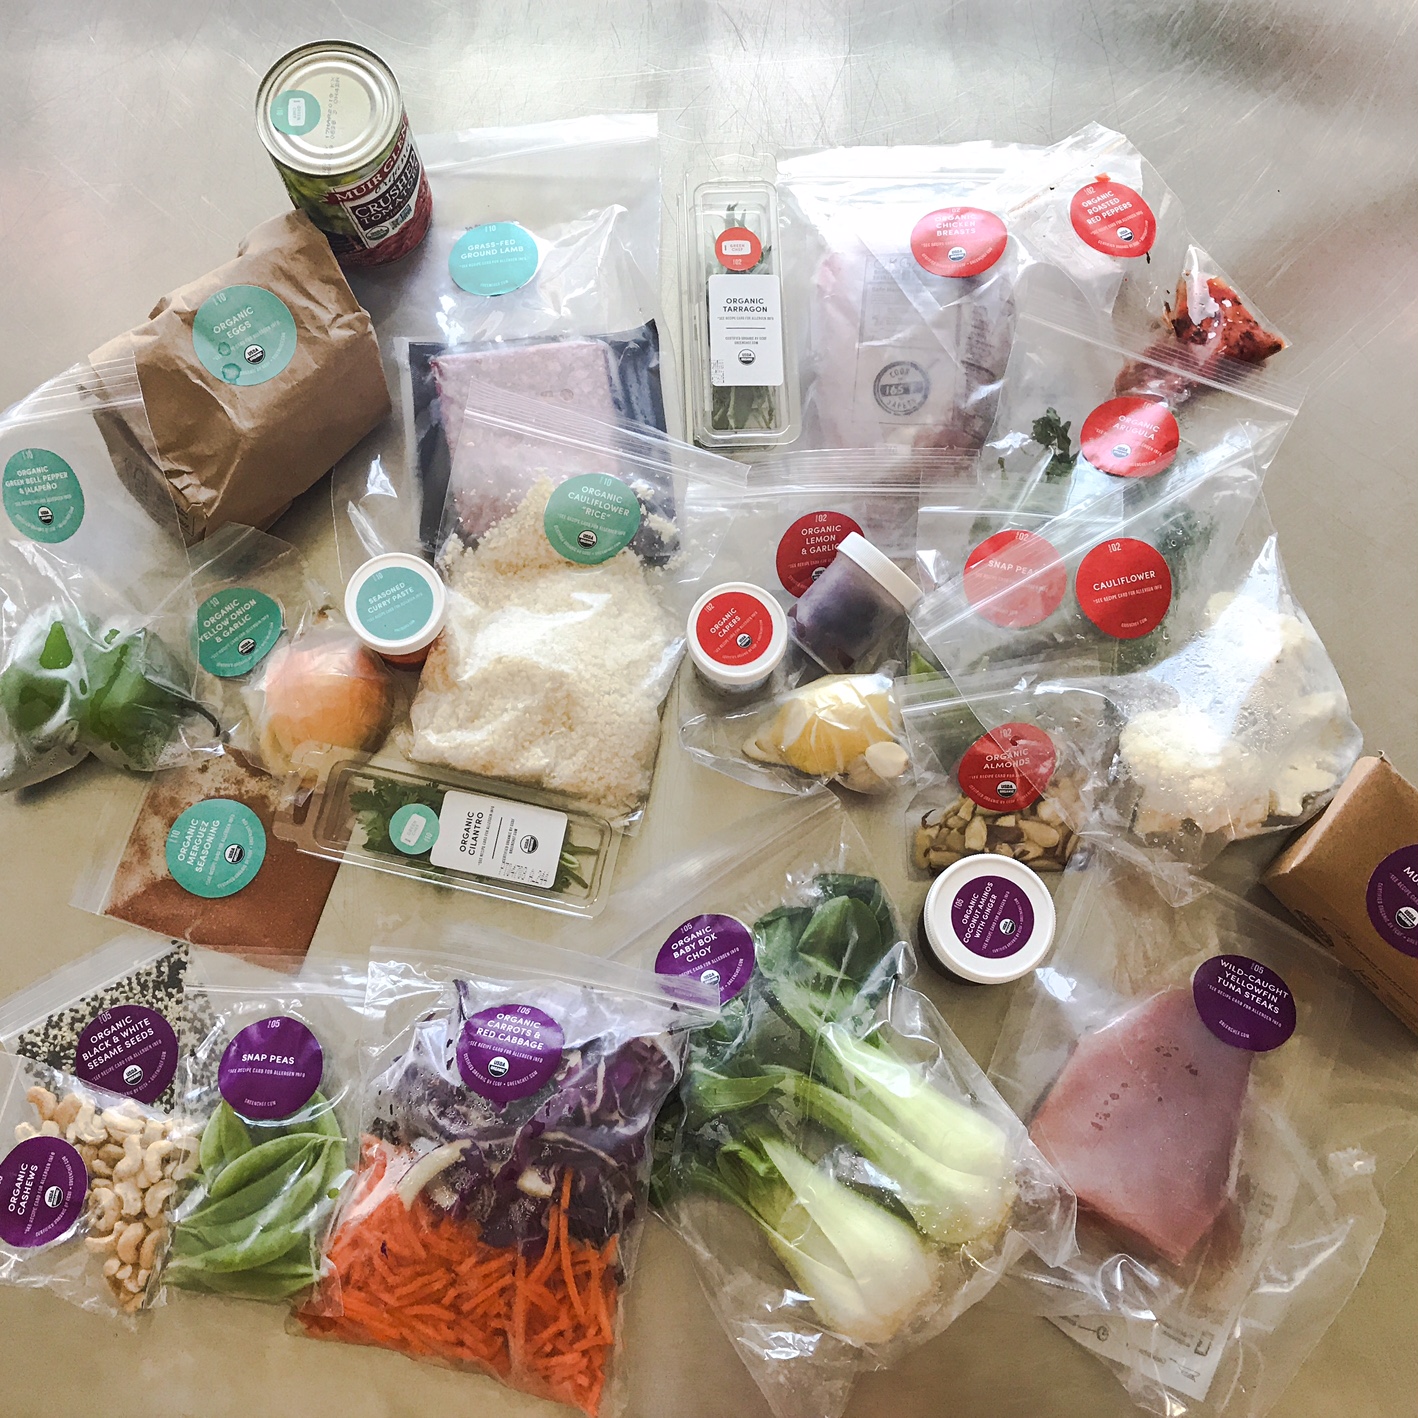 KETO PRODUCT REVIEW: GREEN CHEF'S NEW KETO FRIENDLY MEAL KITS by Jen Fisch via Keto In The City